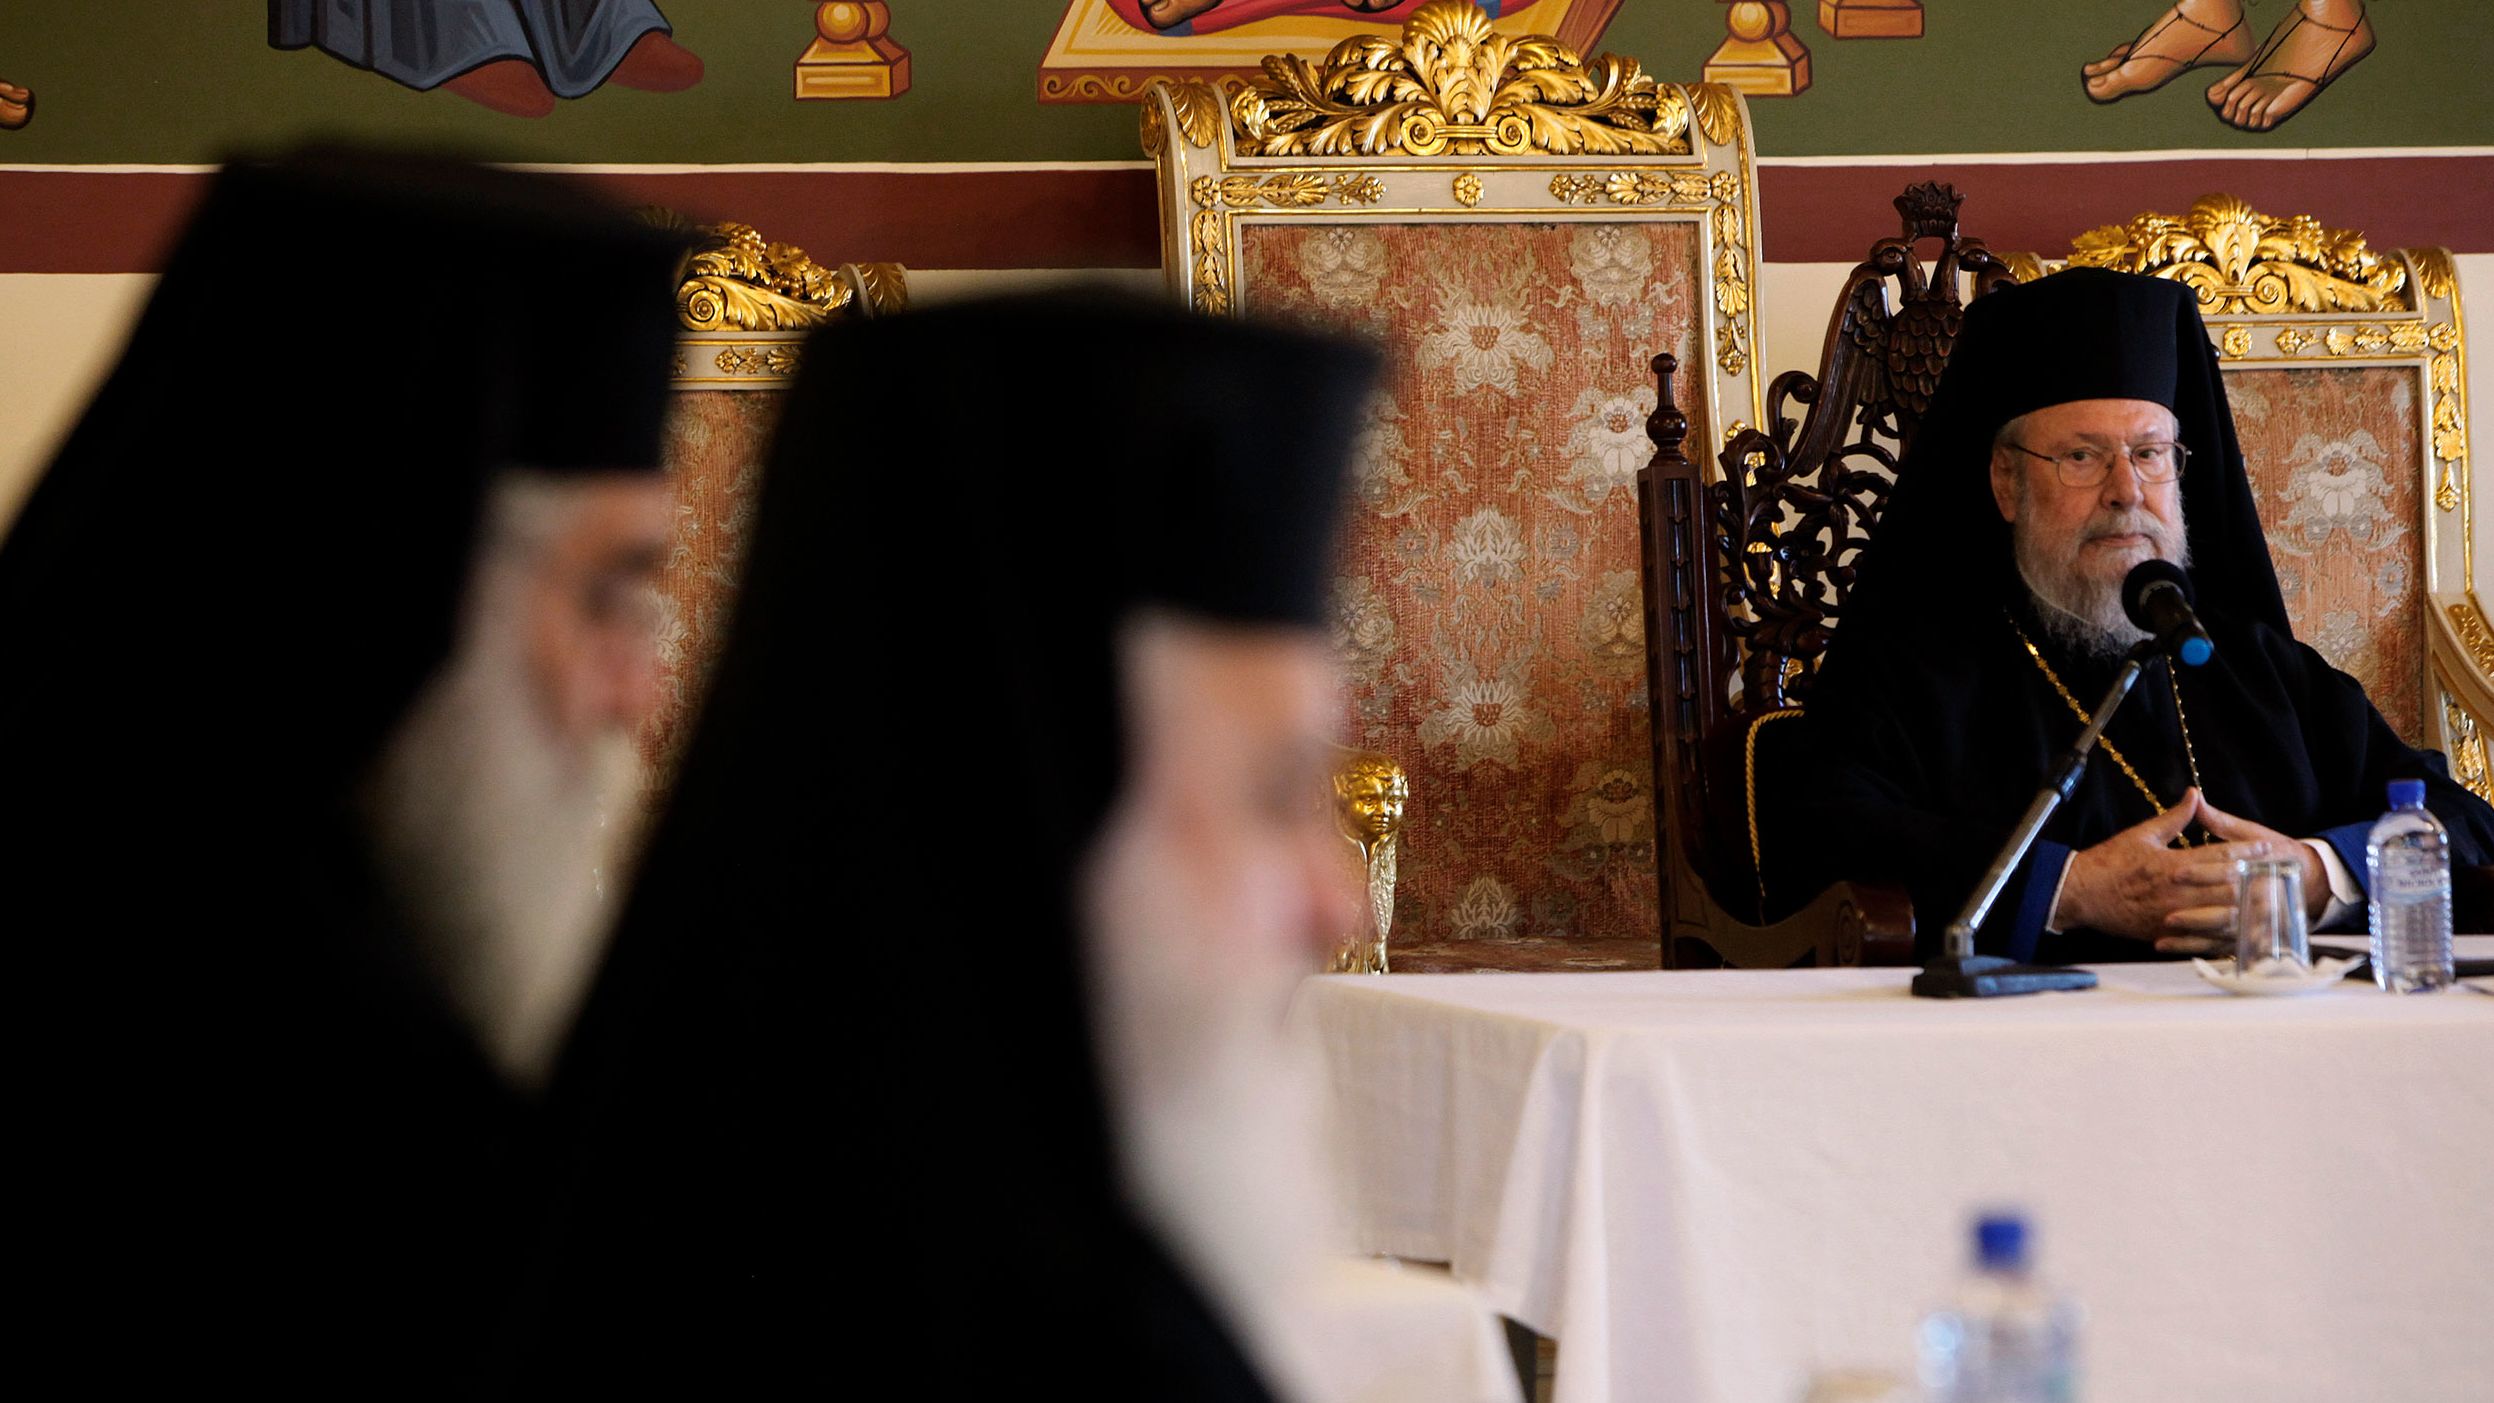 The Holy Synod of the Orthodox Church of Cyprus has called for the song to be withdrawn.